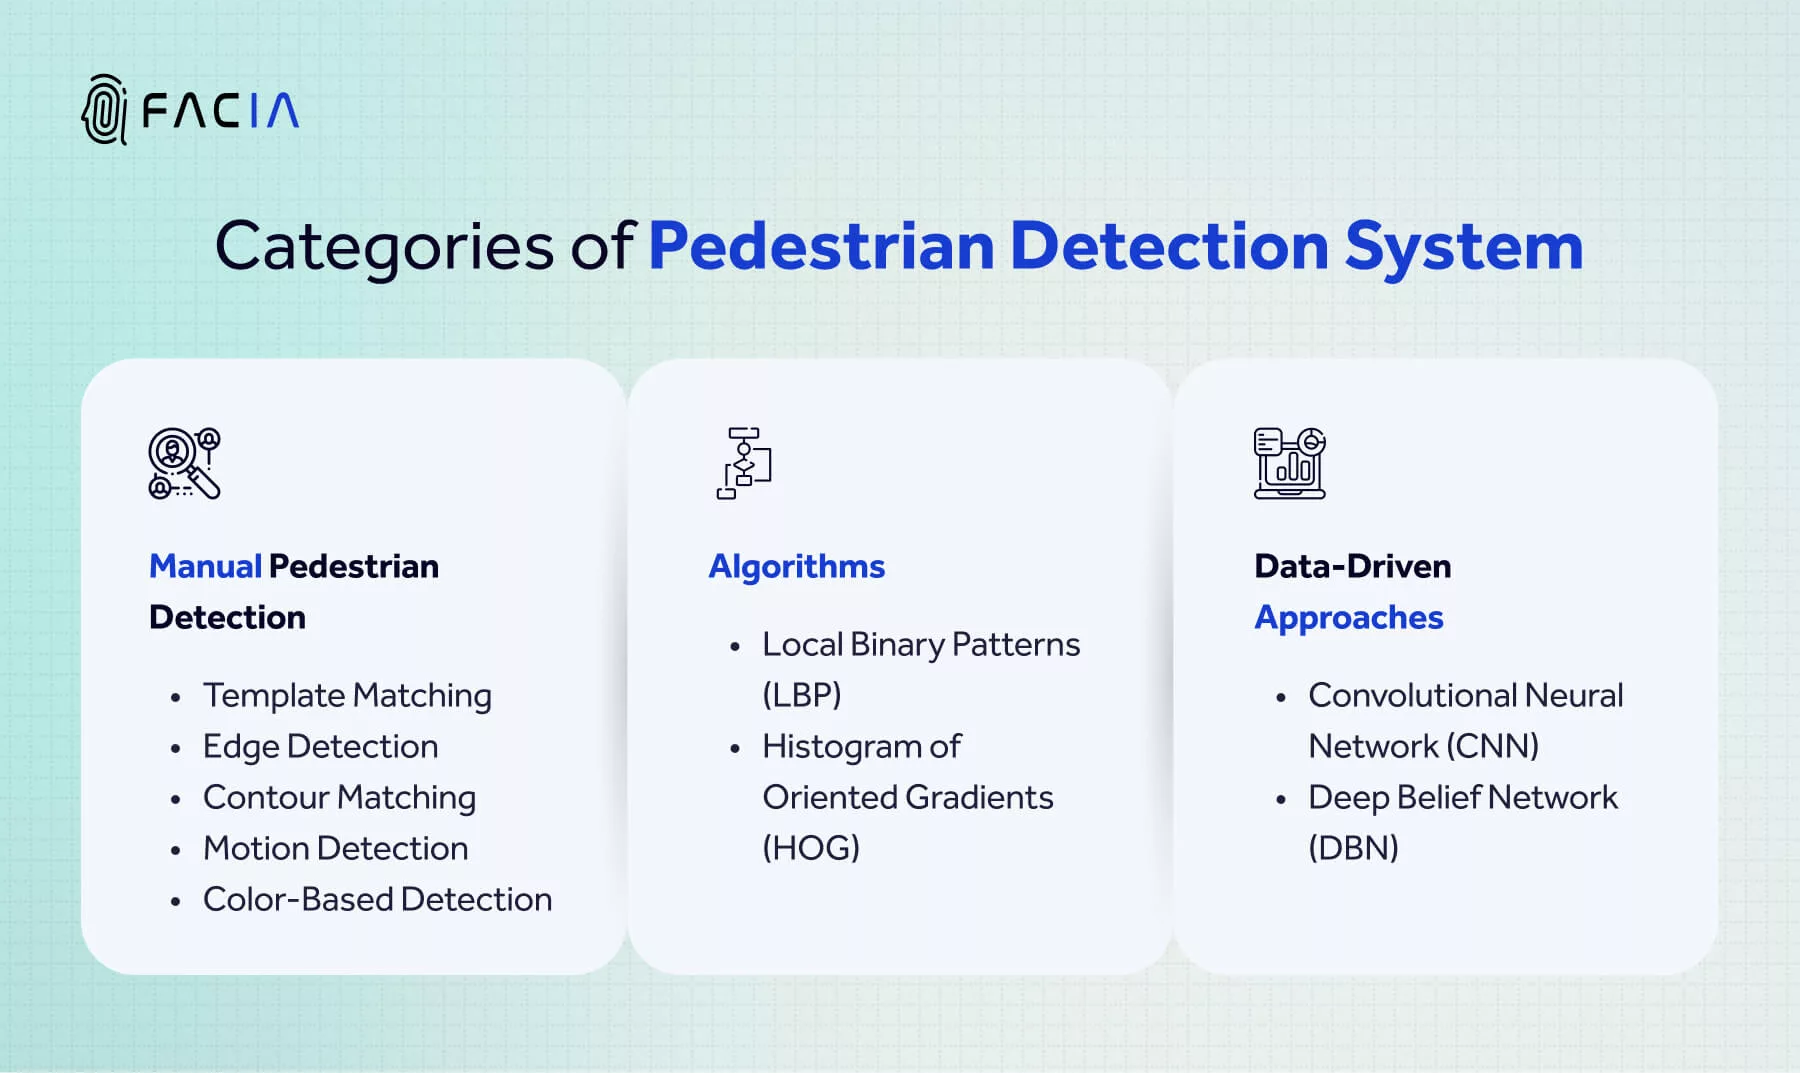 This chart illustrates three major categories of Pedestrian Detection Systems including: 1) Manual Pedestrian Detection 2) Algorithms 3) Data-Driven Approaches